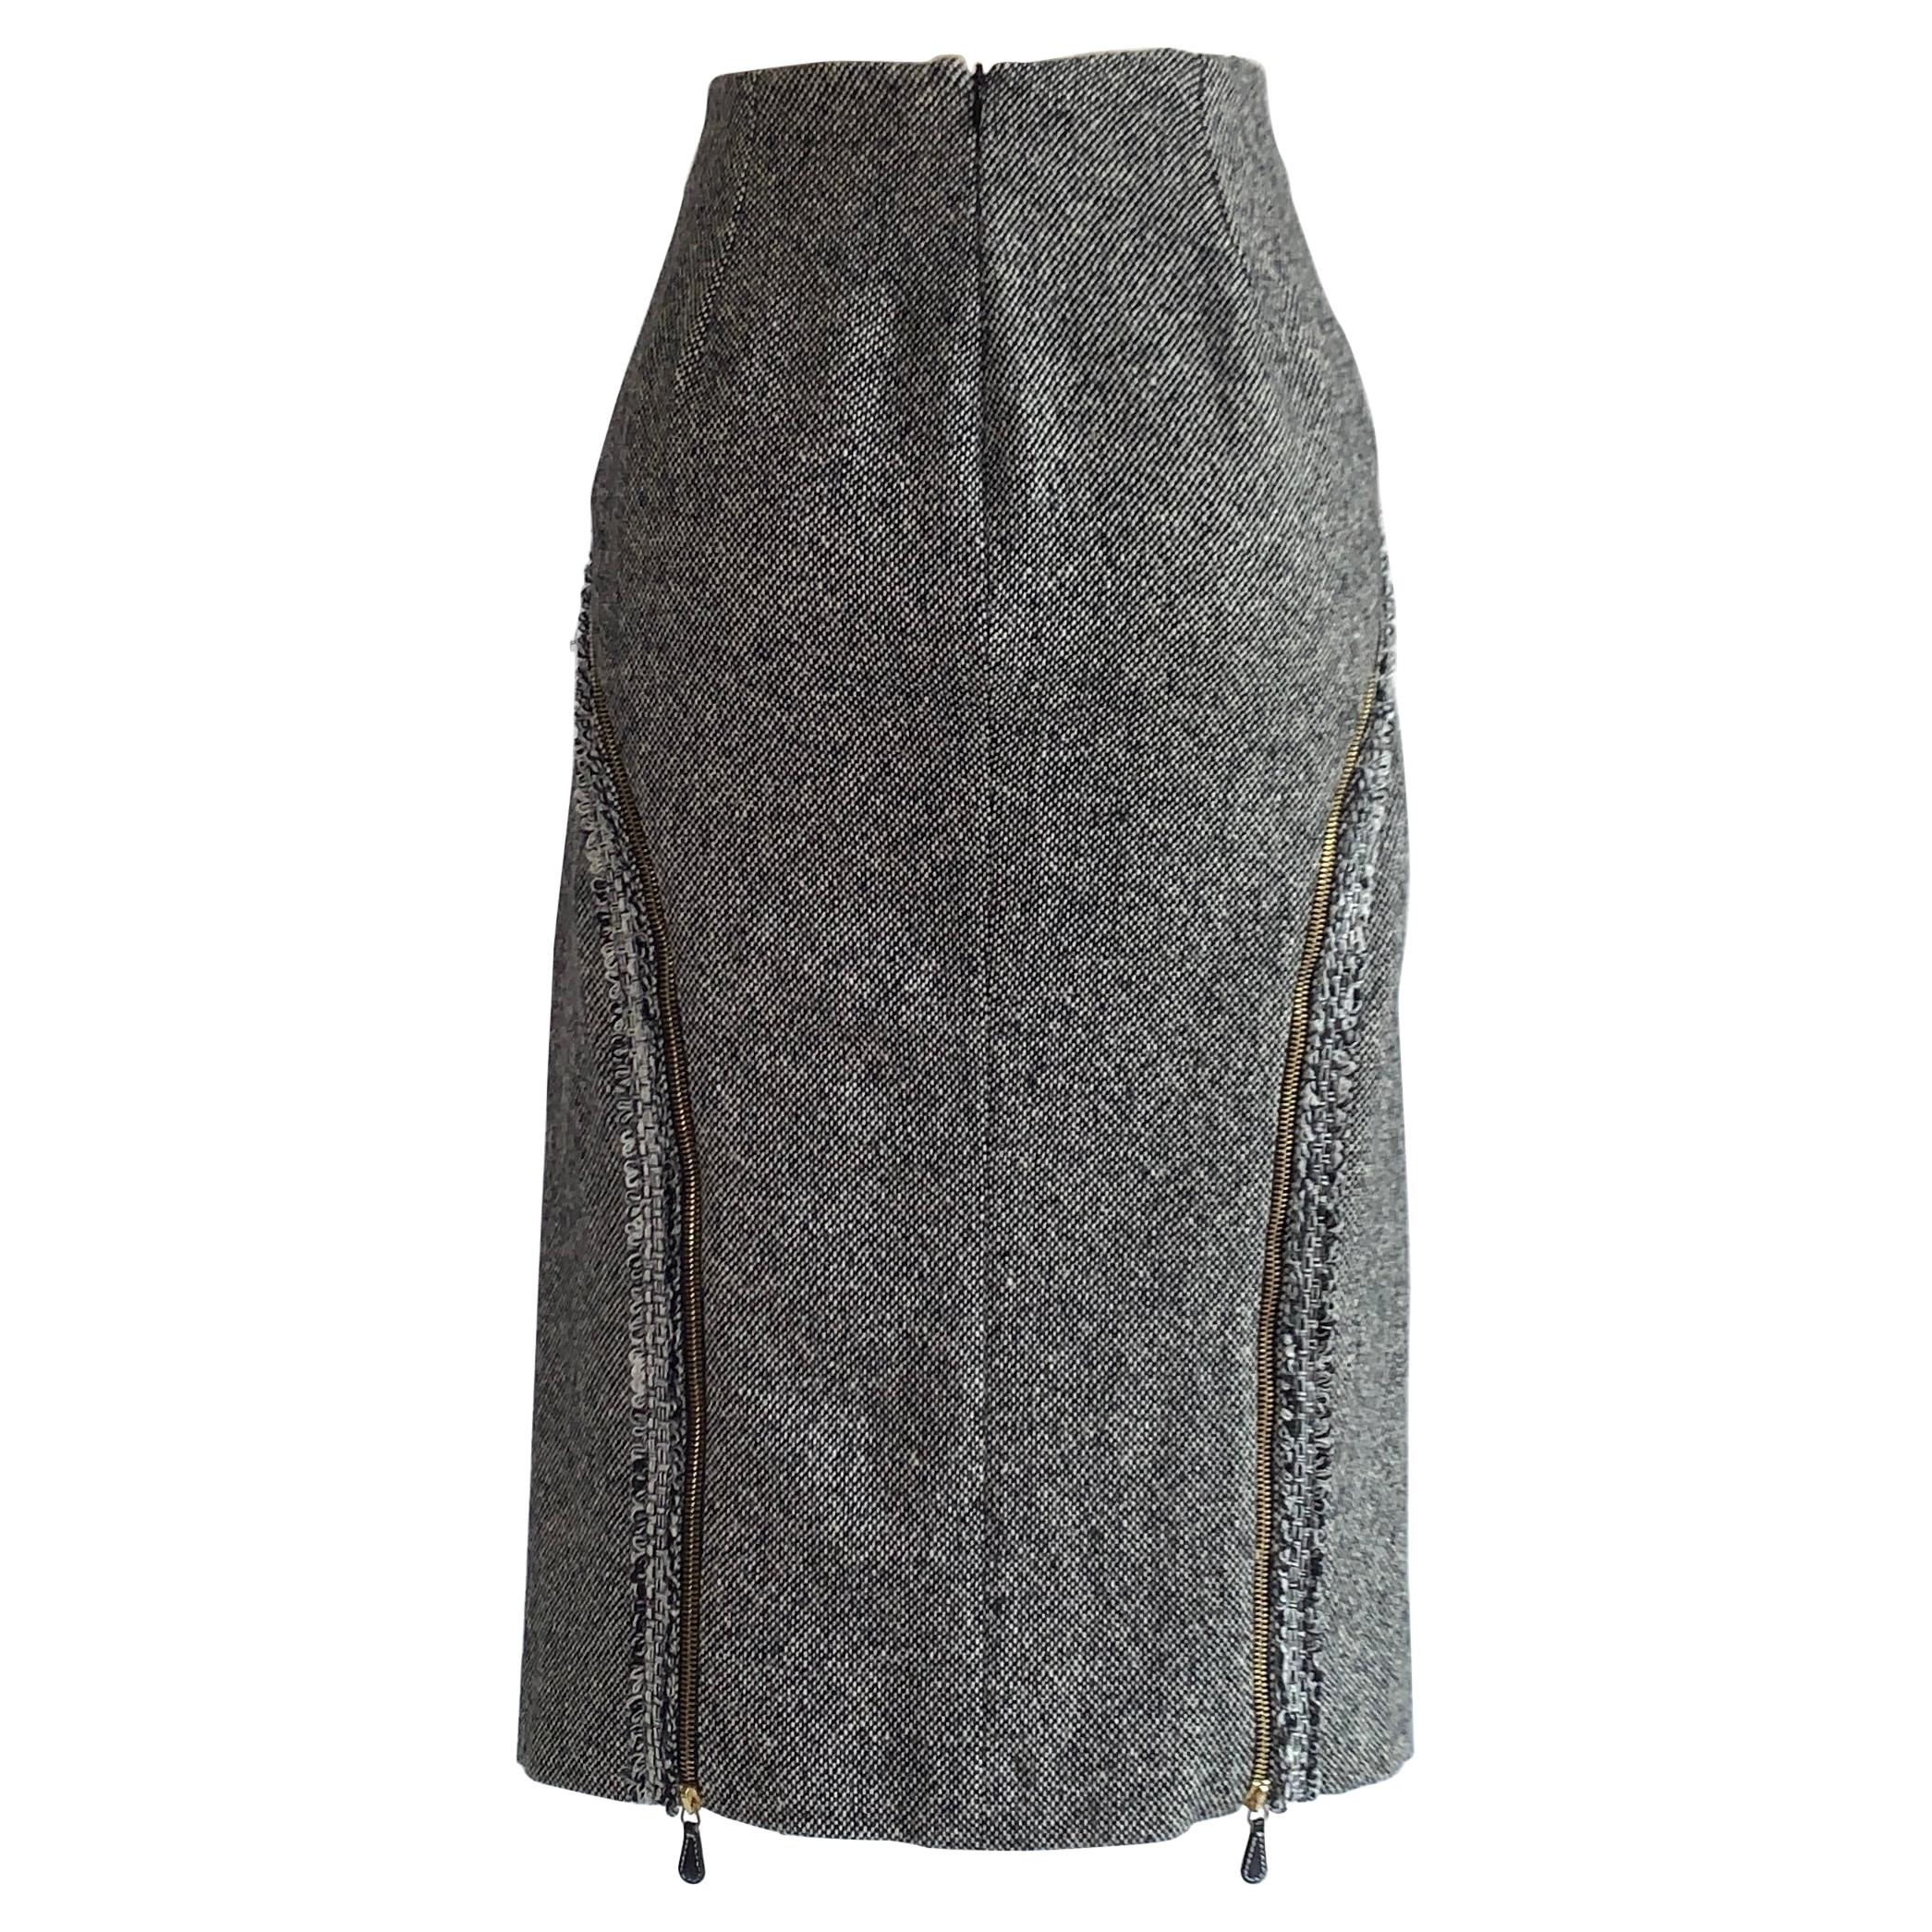 Alexander McQueen 2003 Zipper Detail Pencil Skirt in Black and White Tweed For Sale